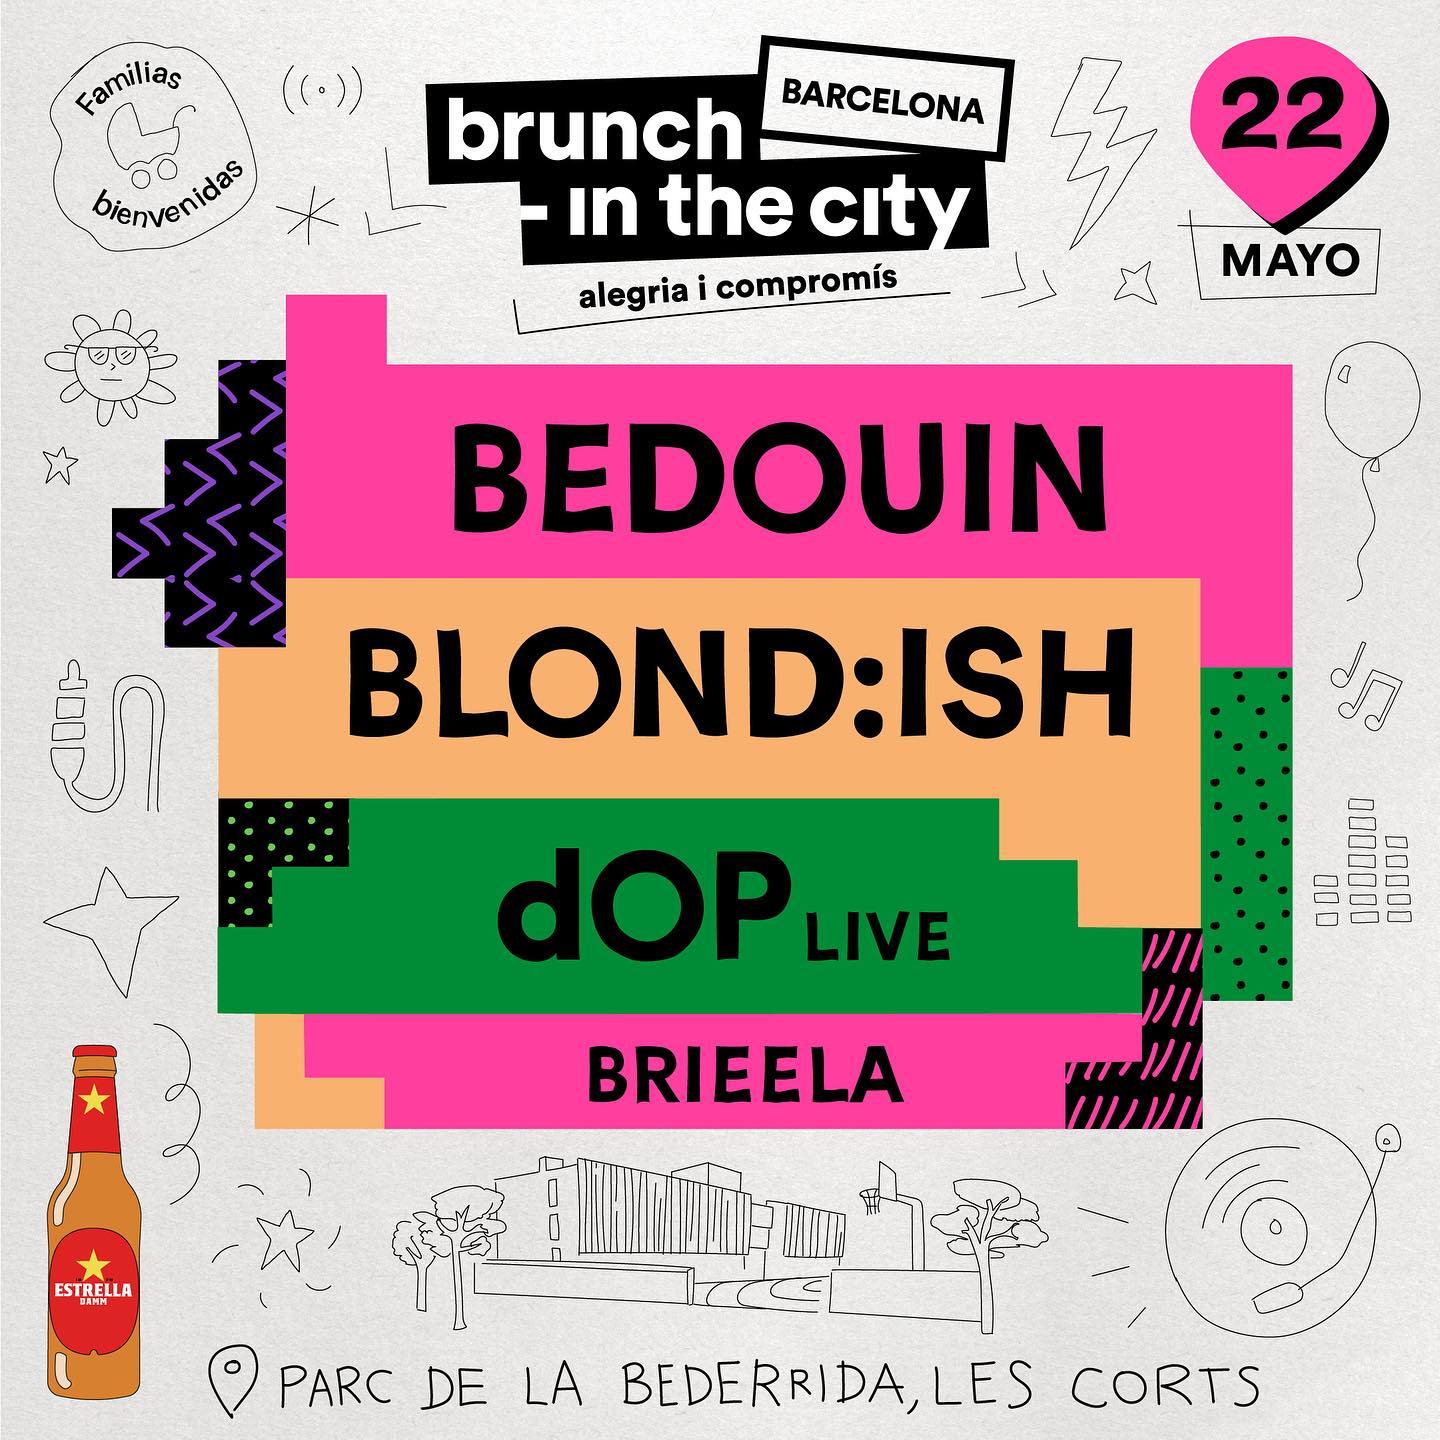 22mayo_brunch-in_the_city